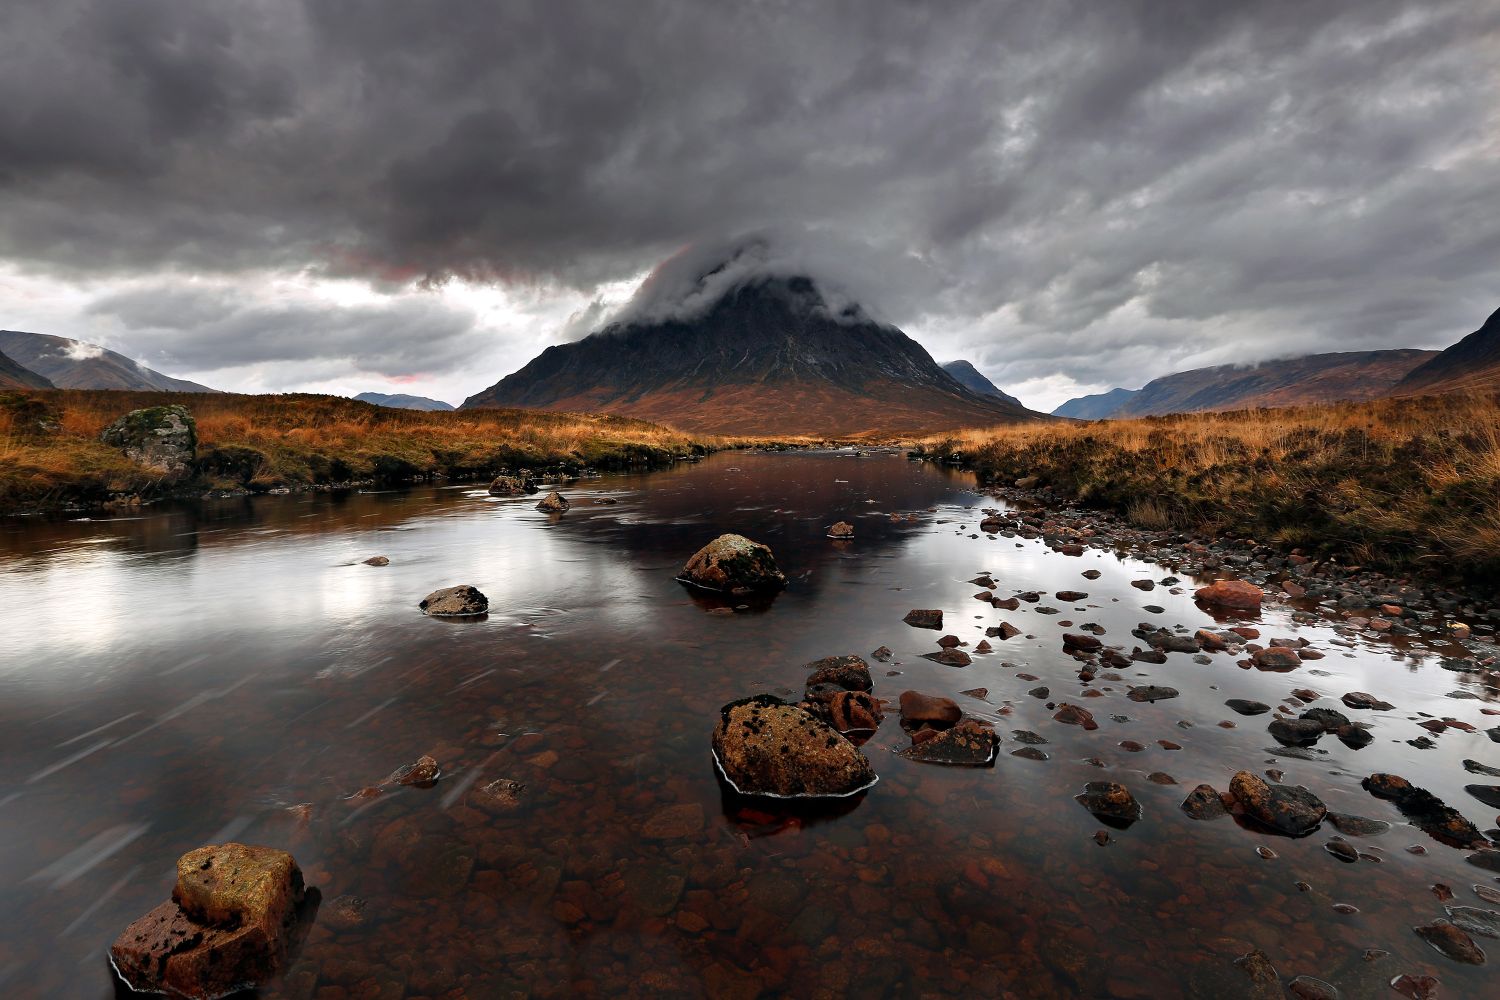 Clouds surround the summit of Buachaille Etive Mor by Martin Lawrence